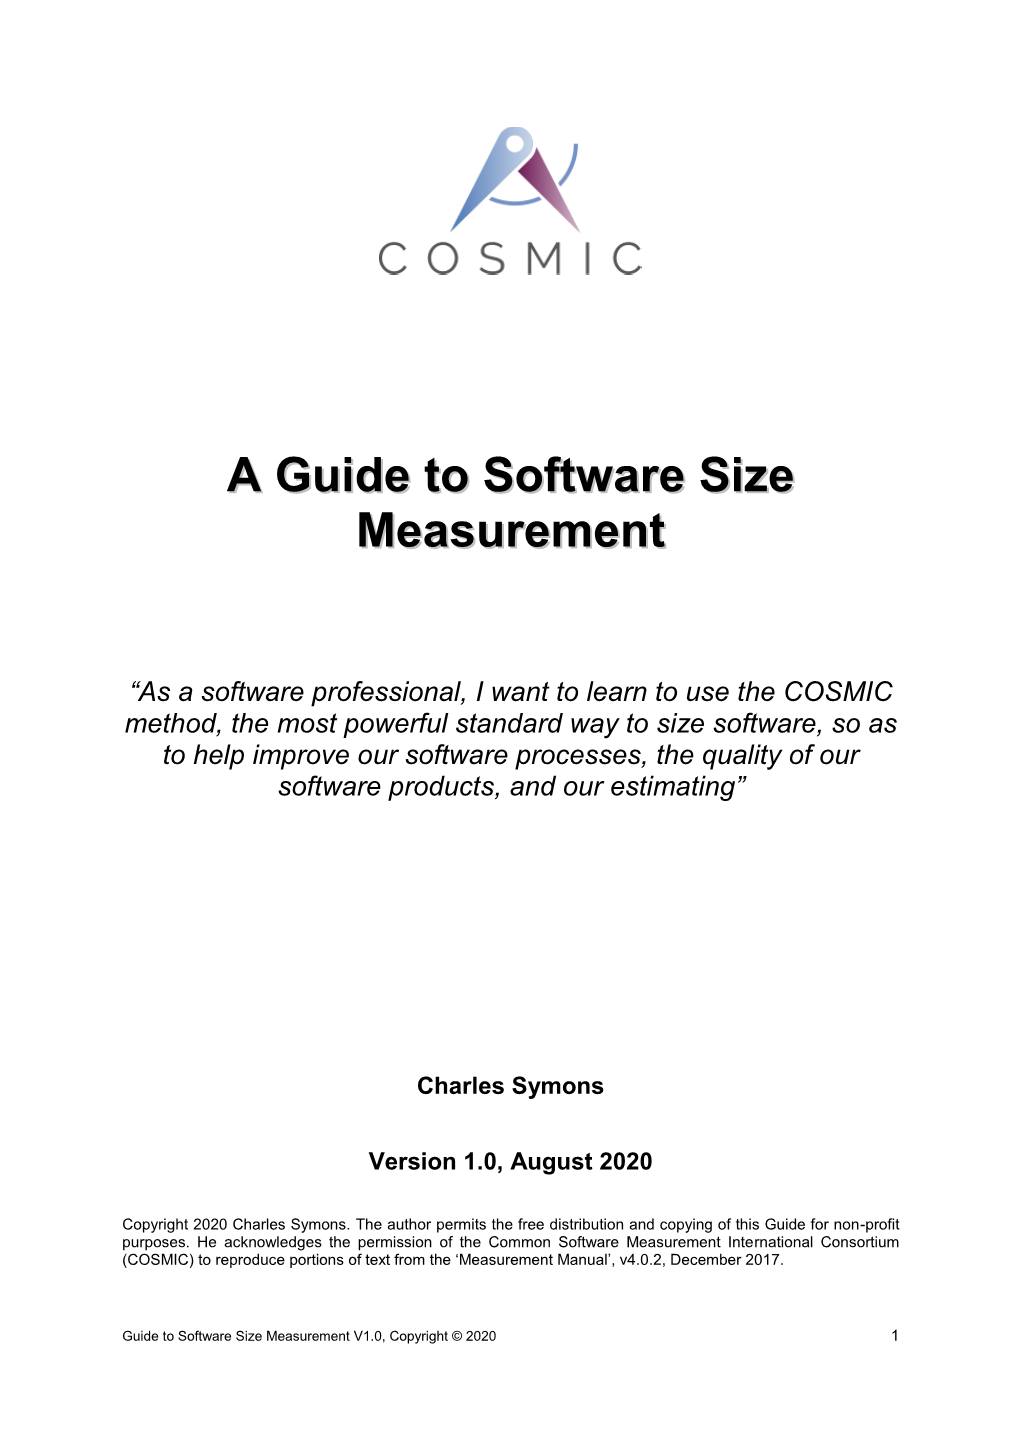 A Guide to Software Size Measurement